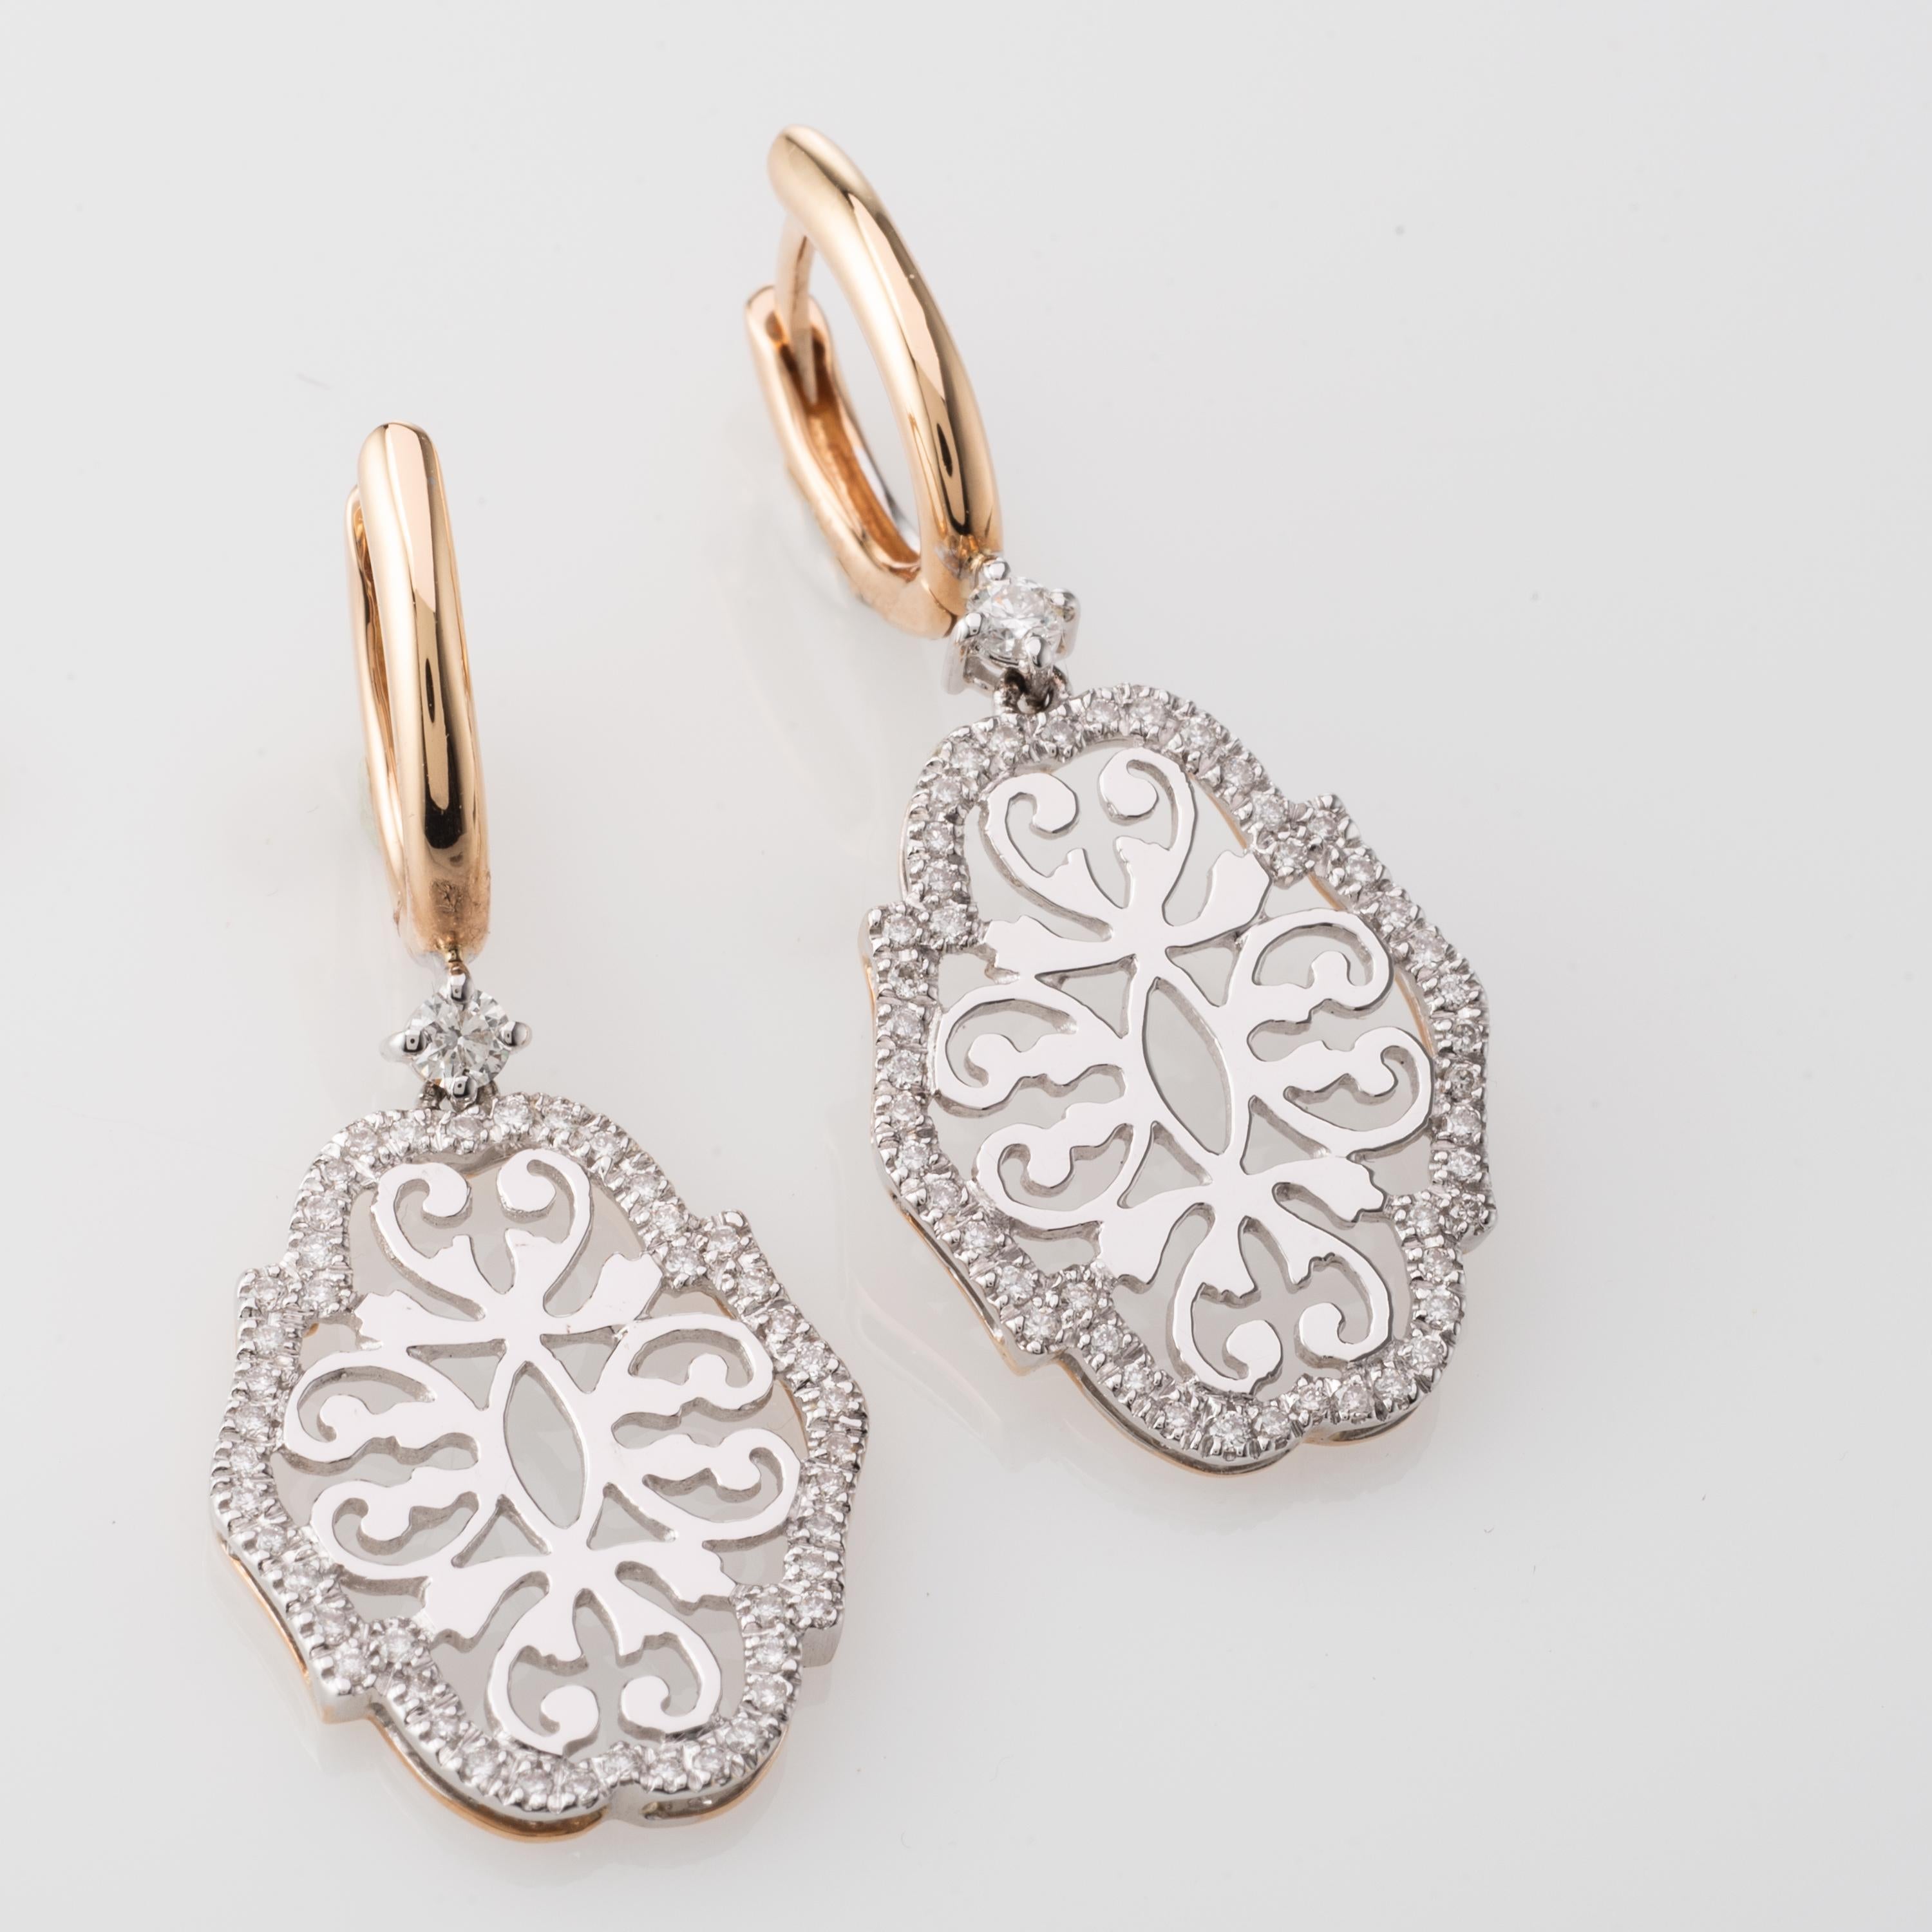 These masterfully crafted Earrings are enhanced by 0.41 Carat Diamonds set in 18 Karat White and Rose Gold. Made in Italy.
We can make this style in 18k yellow or rose gold. We can custom make these earrings according to your taste. When customising